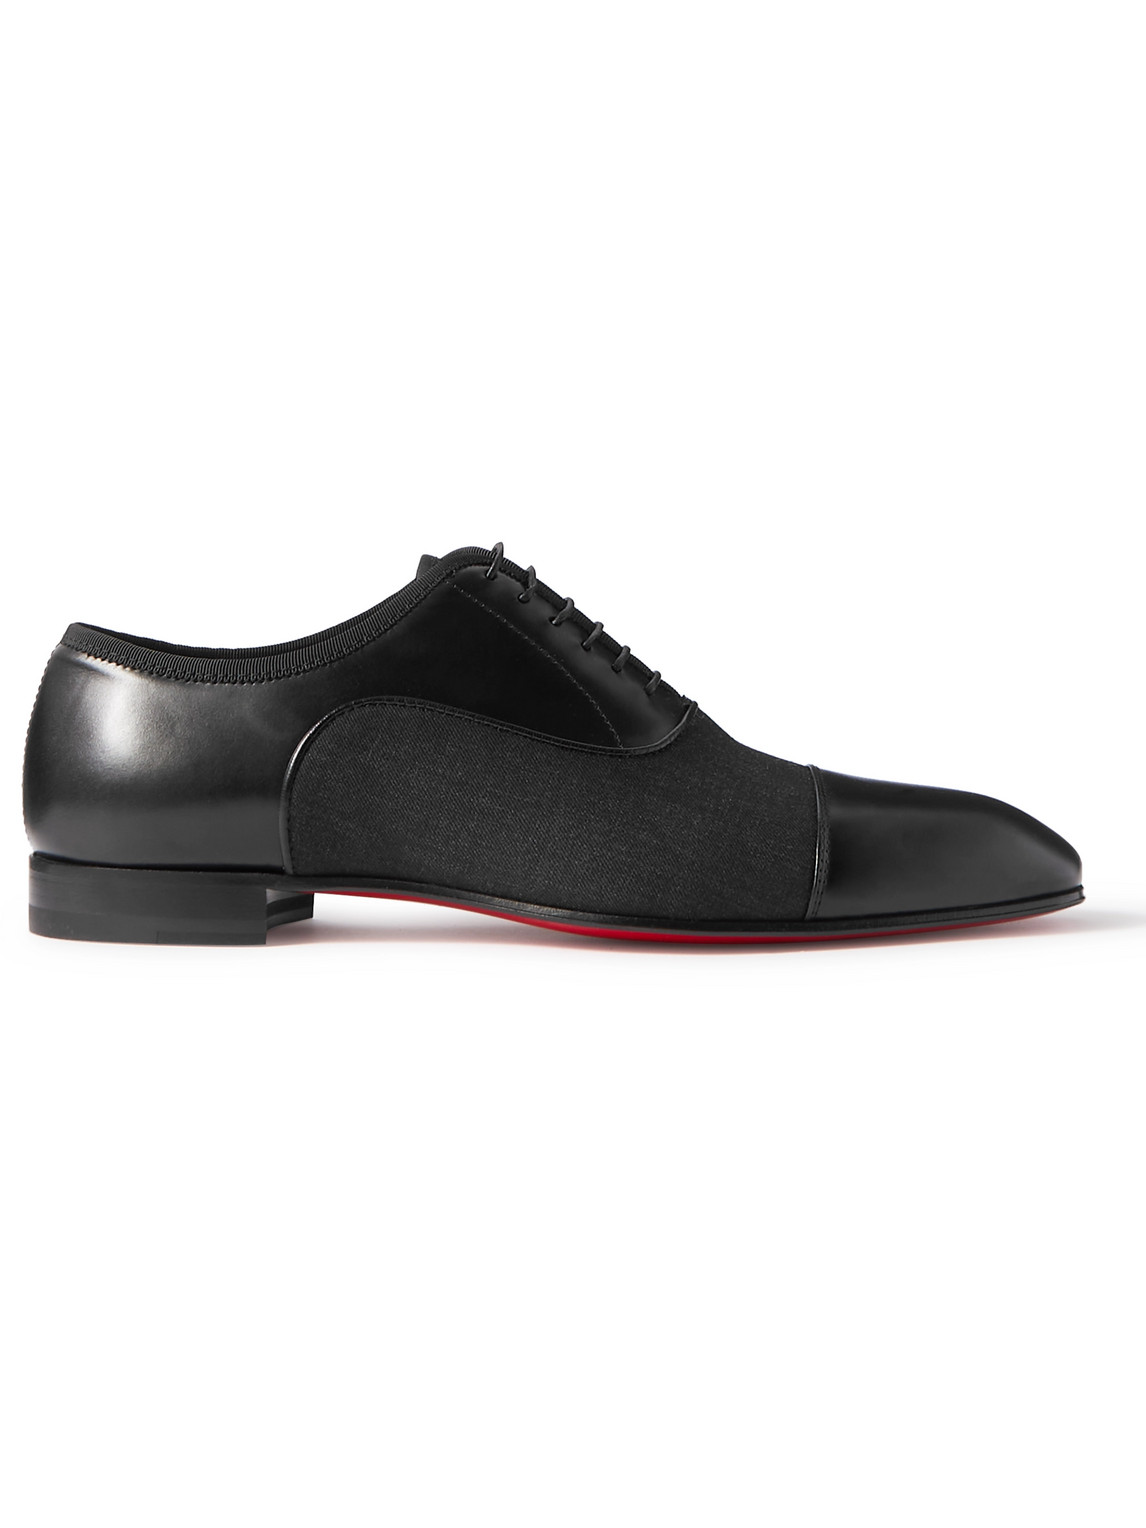 Greggo Leather and Canvas Oxford Shoes